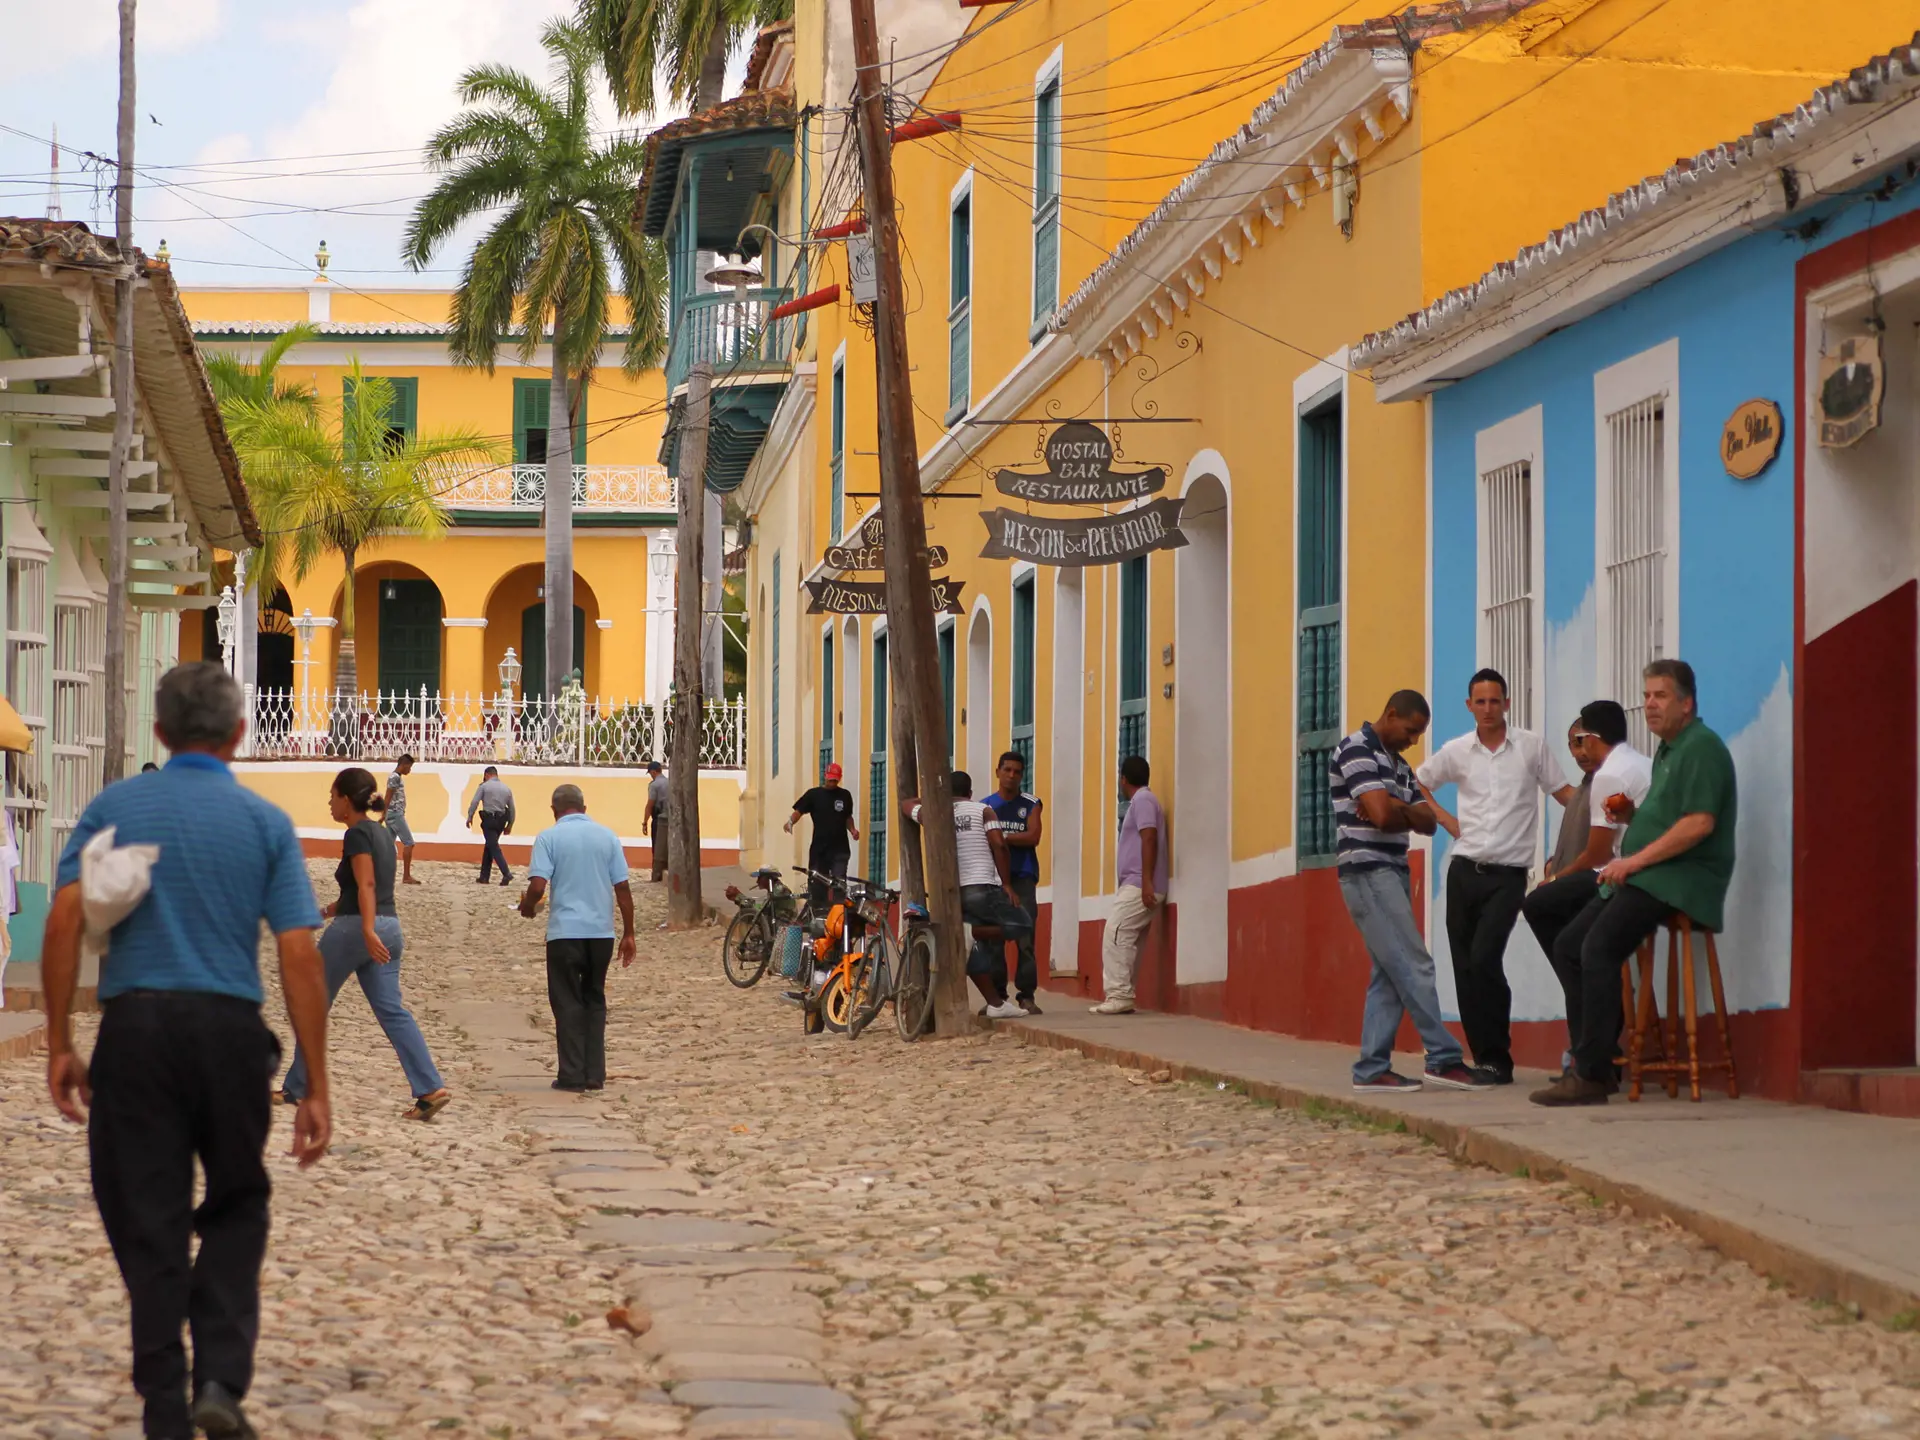 shutterstock_182426093 Cuban people hanging out and crossing the cobblestone street in Trinidad, Cuba.jpg